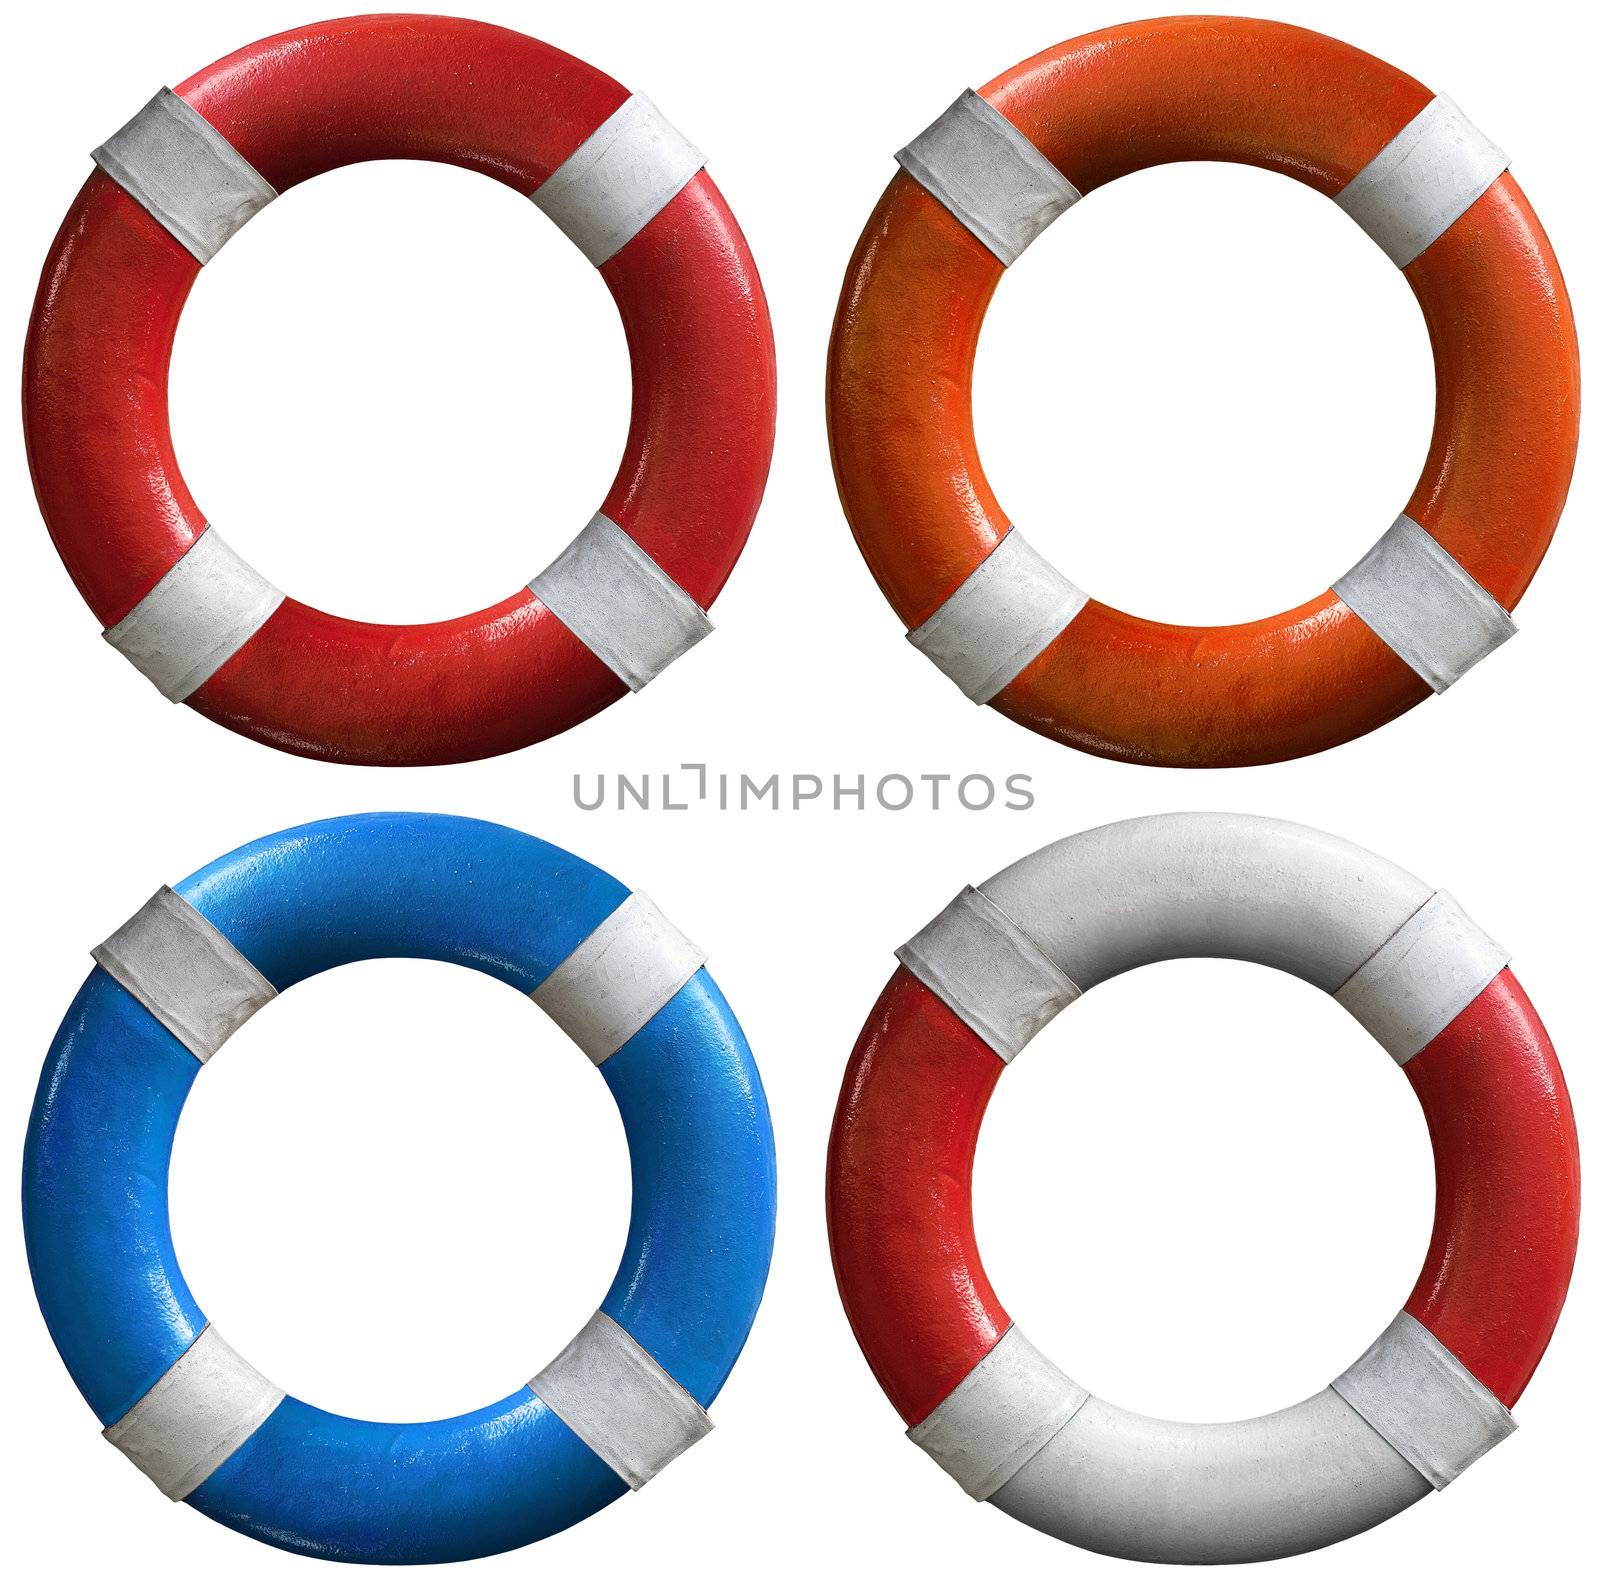 Four life buoys of various colors: red and white, orange and white, blue and white